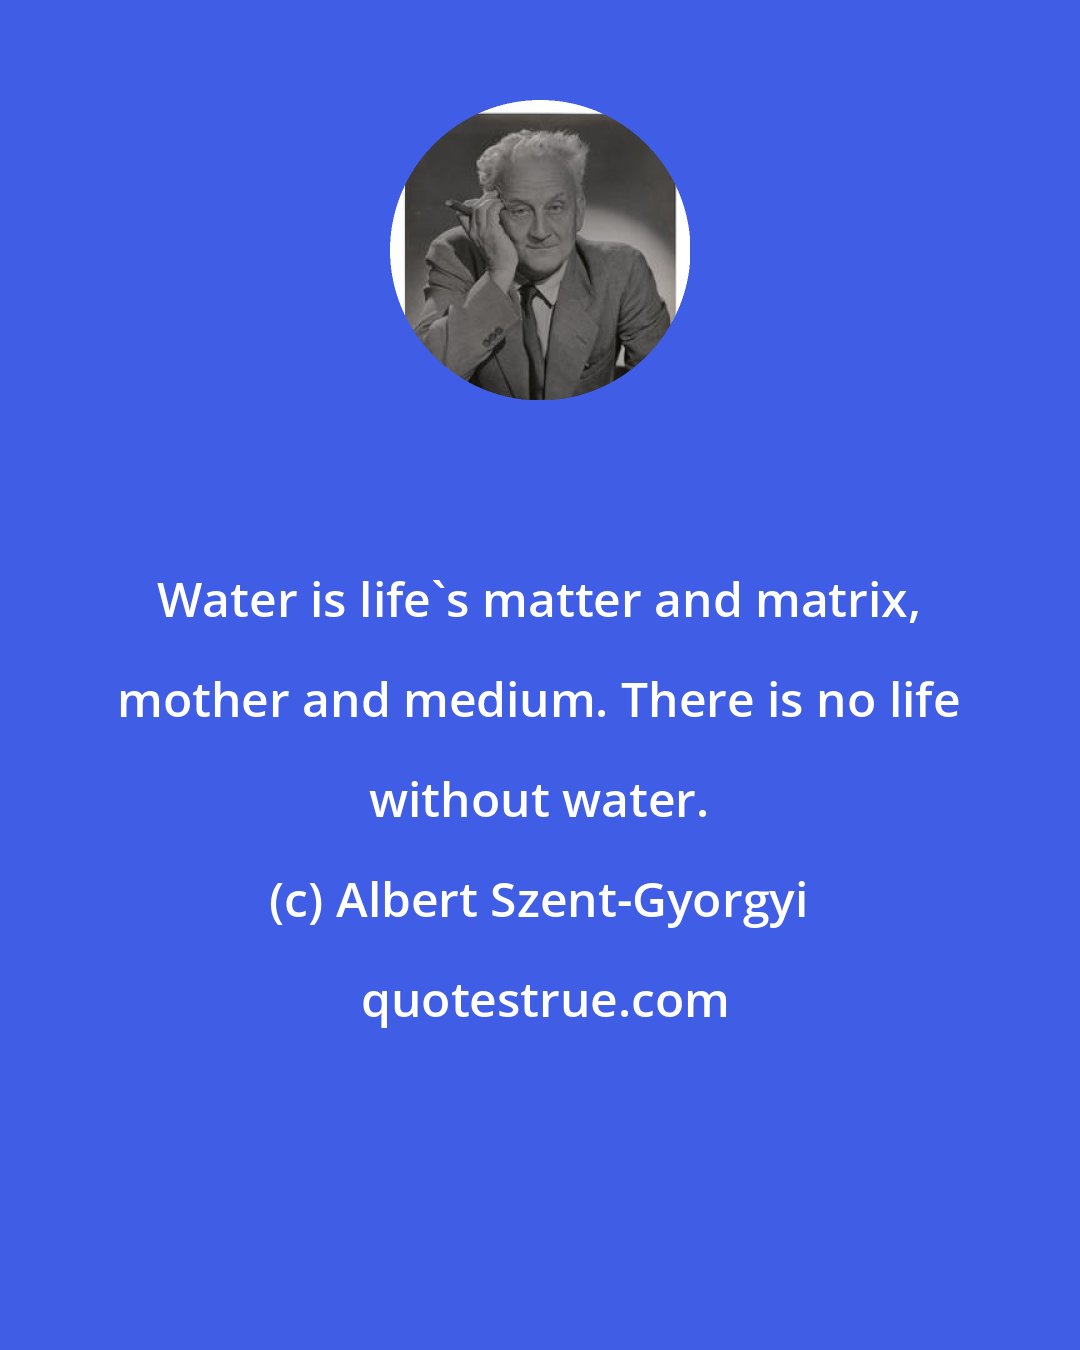 Albert Szent-Gyorgyi: Water is life's matter and matrix, mother and medium. There is no life without water.